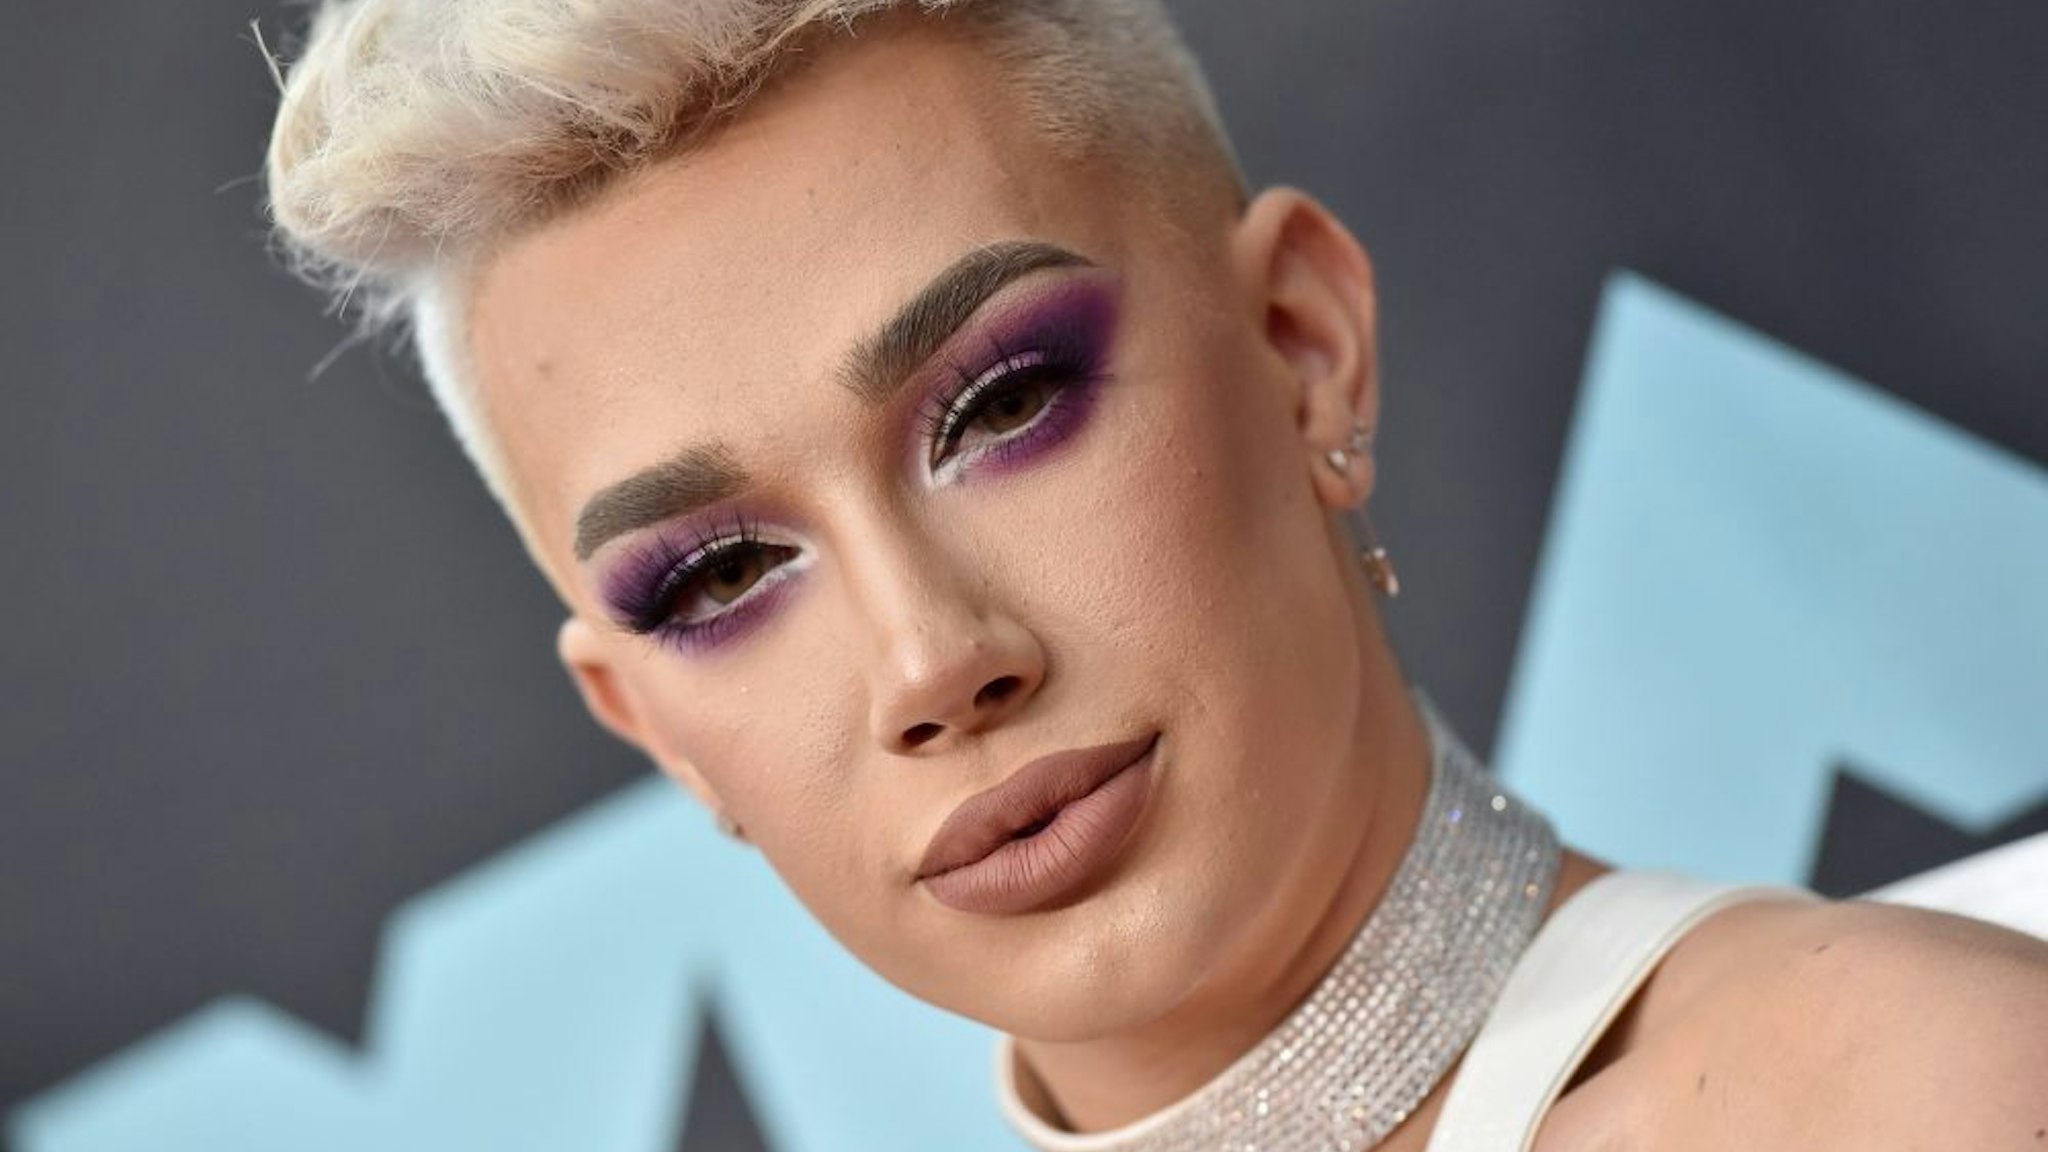 NEWARK, NEW JERSEY - AUGUST 26: James Charles attends the 2019 MTV Video Music Awards at Prudential Center on August 26, 2019 in Newark, New Jersey.